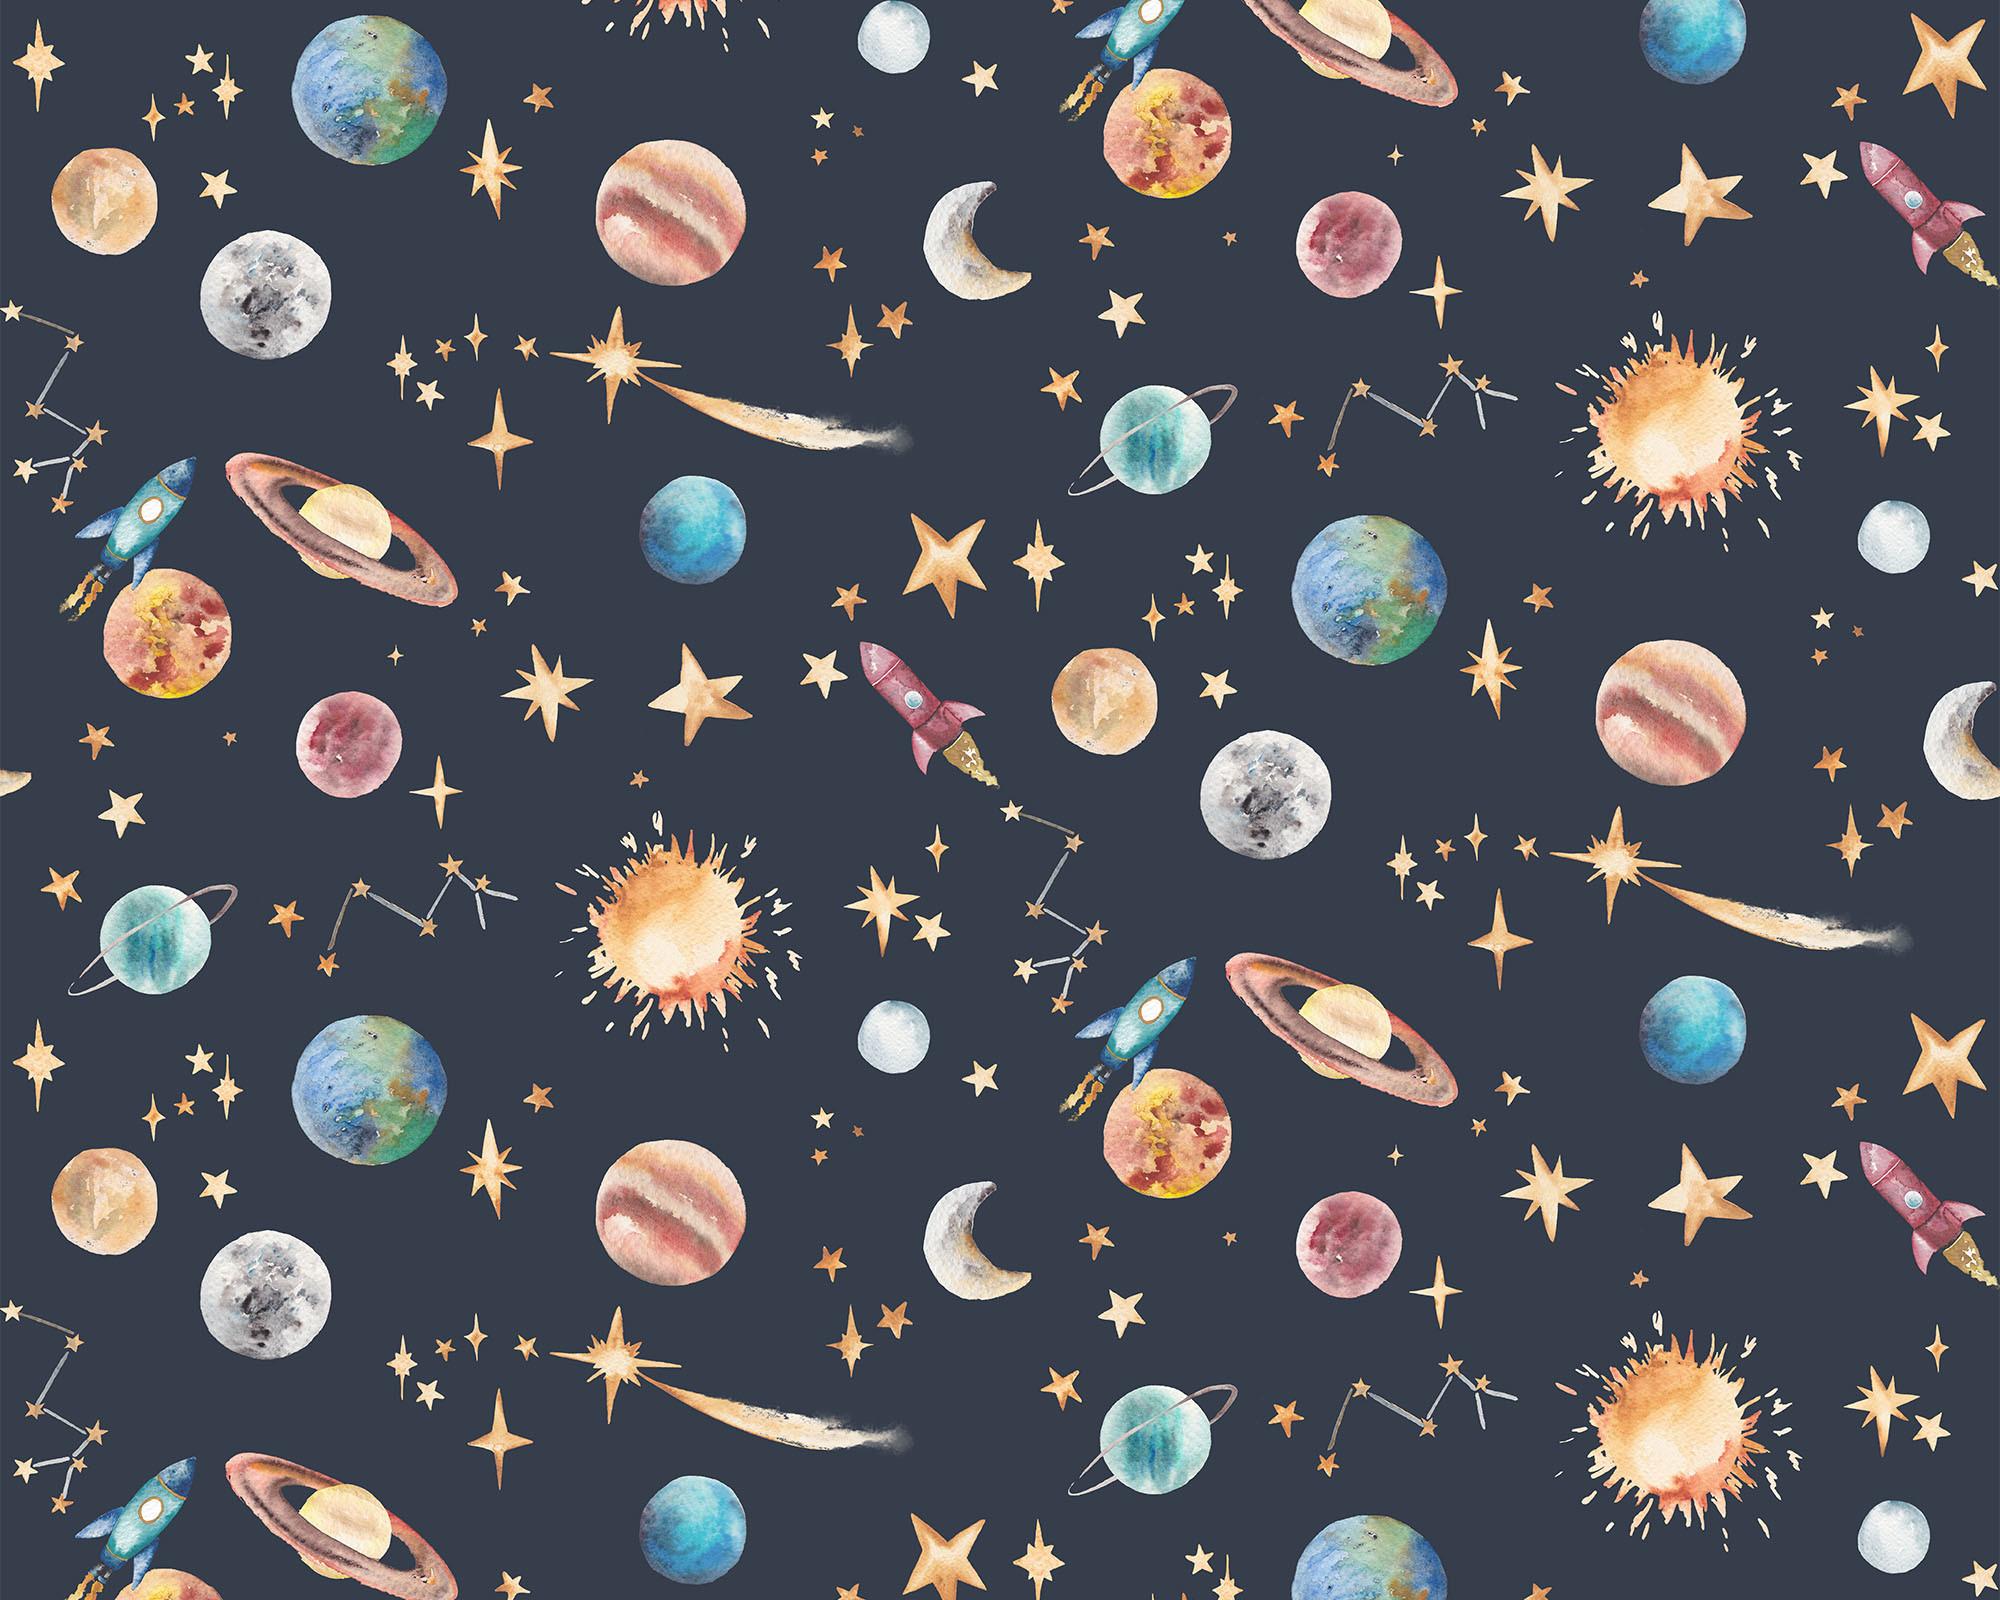 Decorate your PC with this Cute Planets Wallpaper